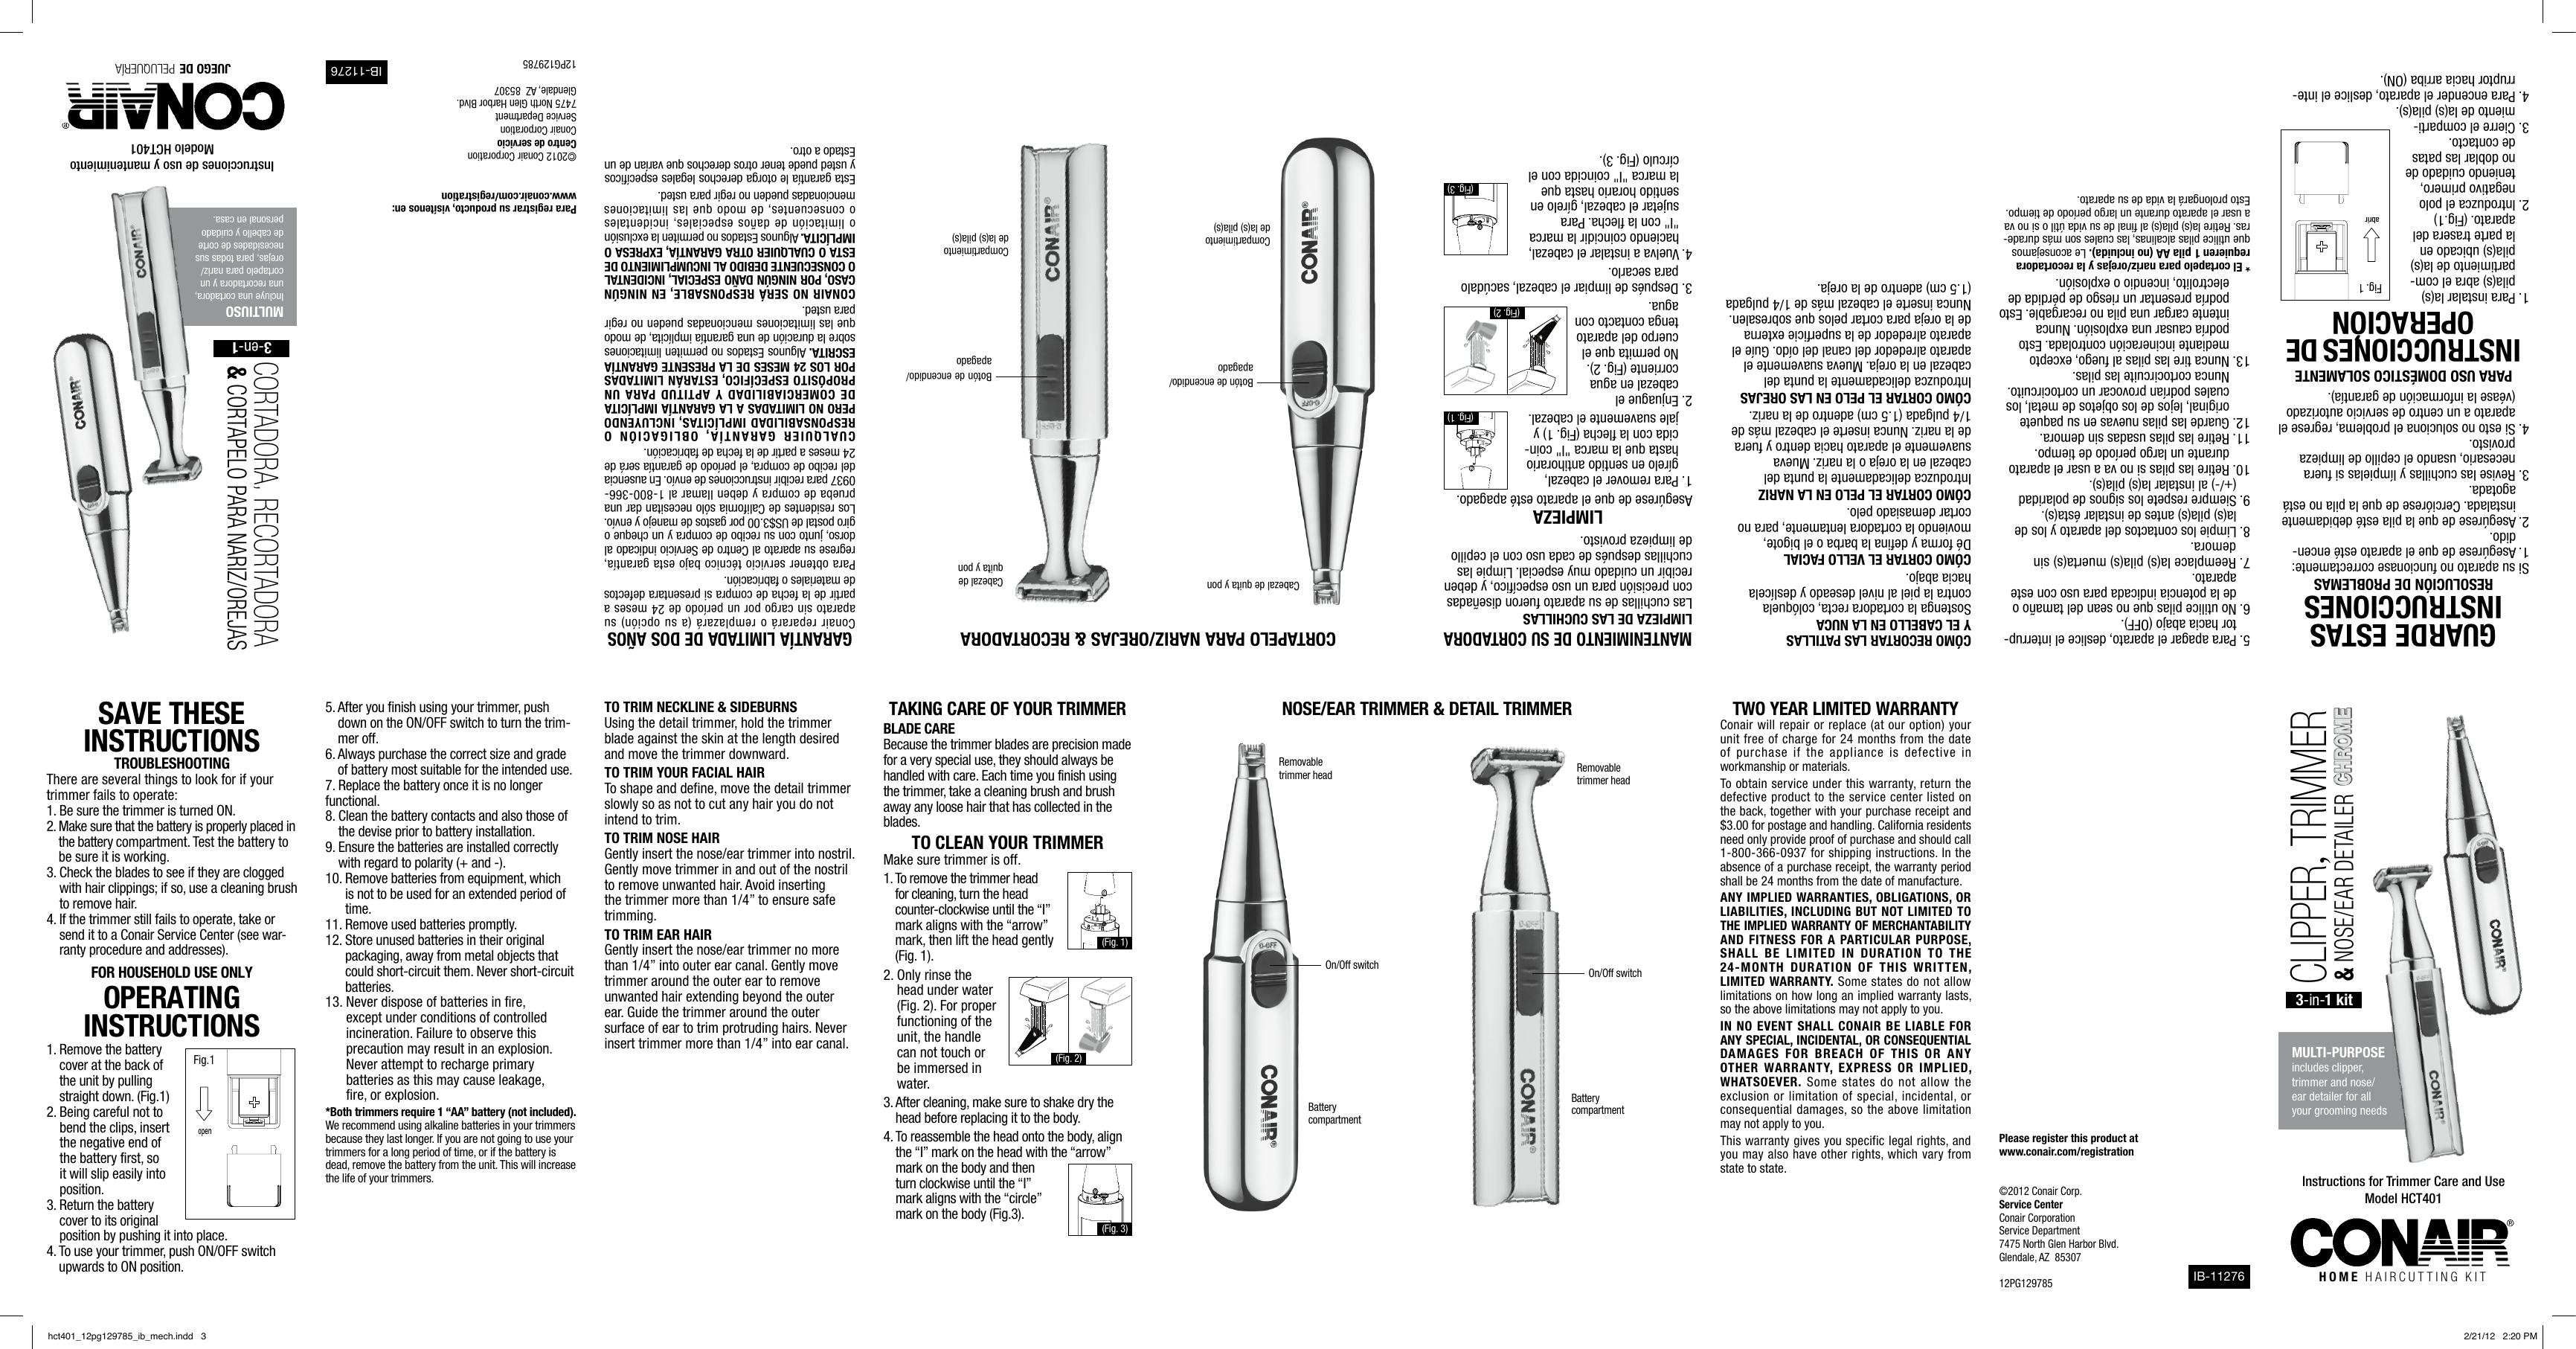 Page 3 of 3 - Conair Conair-Tv-Vcr-Combo-Hct401-Users-Manual-  Conair-tv-vcr-combo-hct401-users-manual